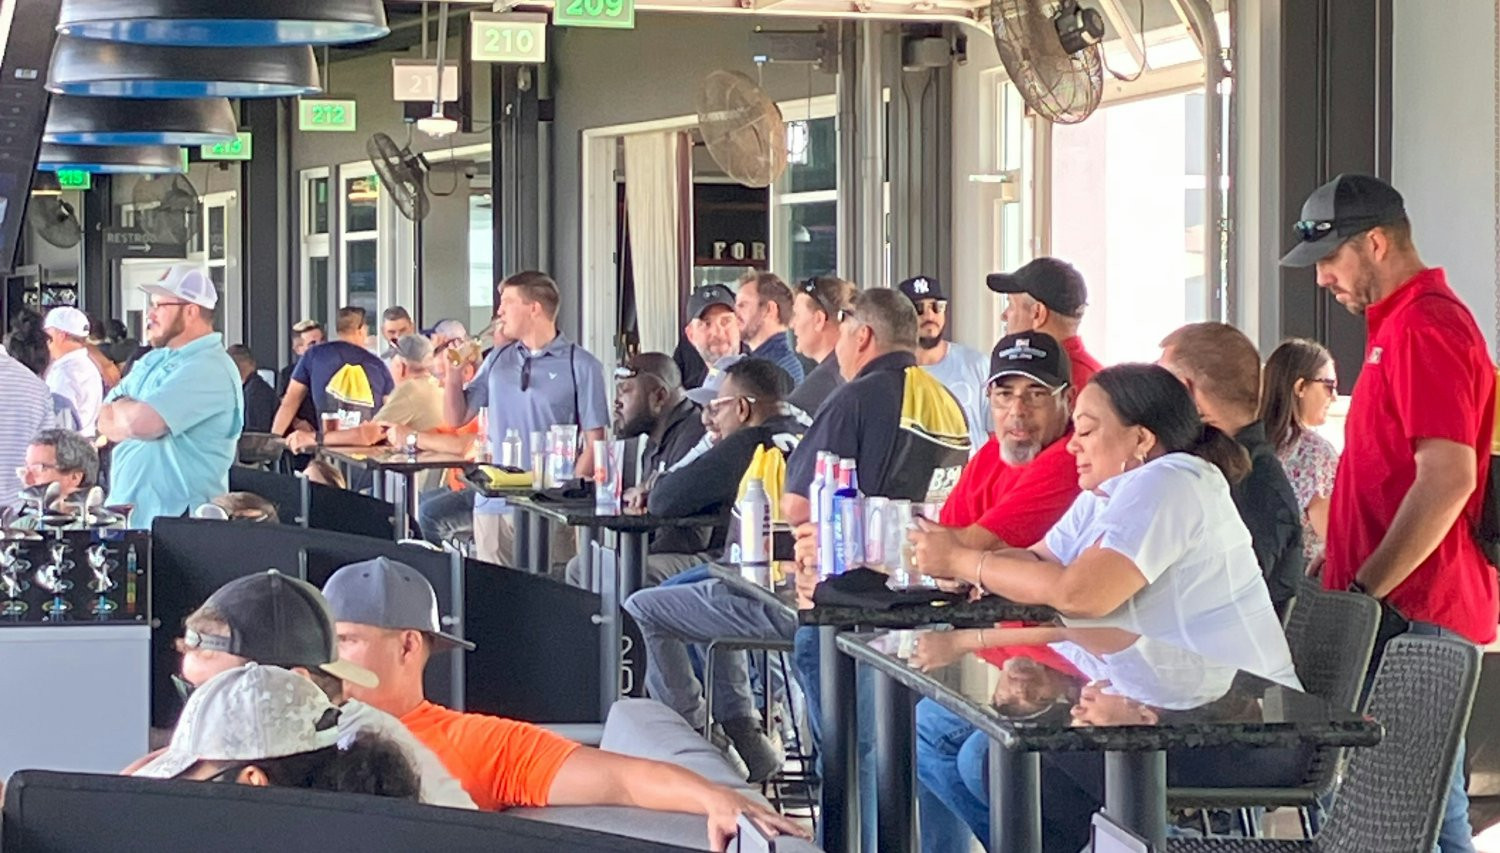 2024 Employee Appreciation Day at Top Golf - This annual event happens in all 3 regions, a thank you to all employees!